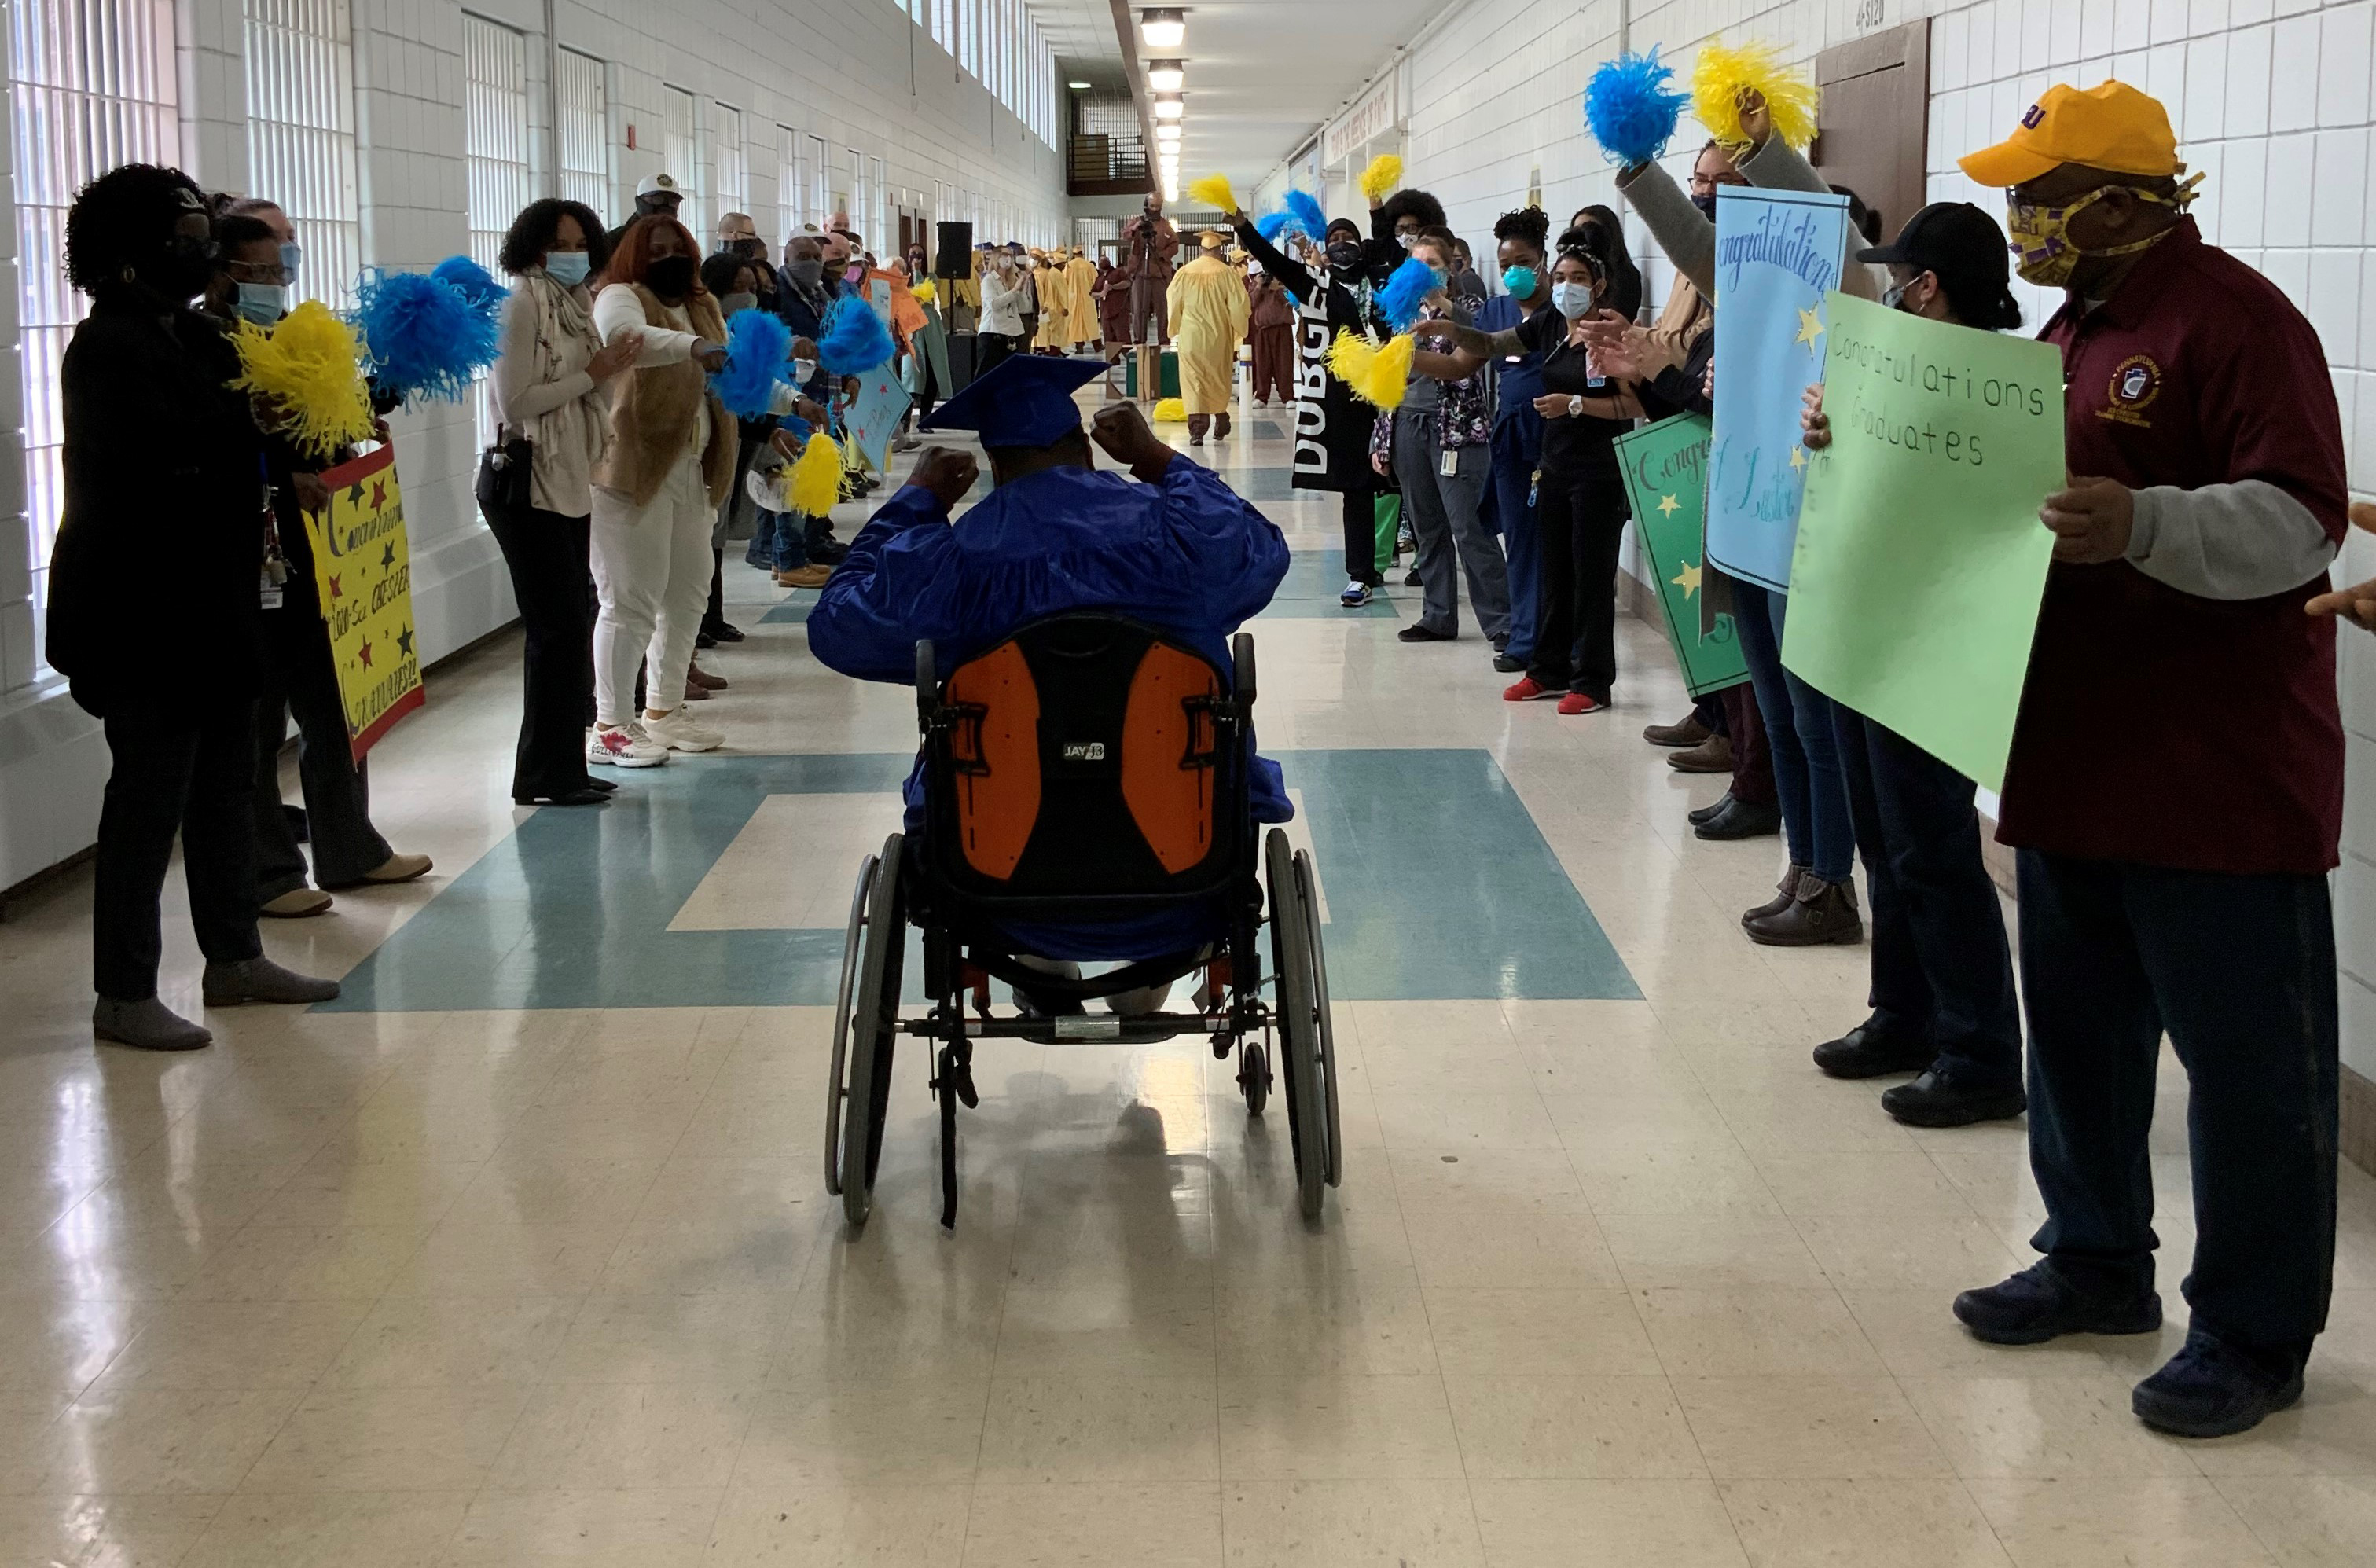 An inmate graduate goes down SCI Chester's main hallway with people cheering him on